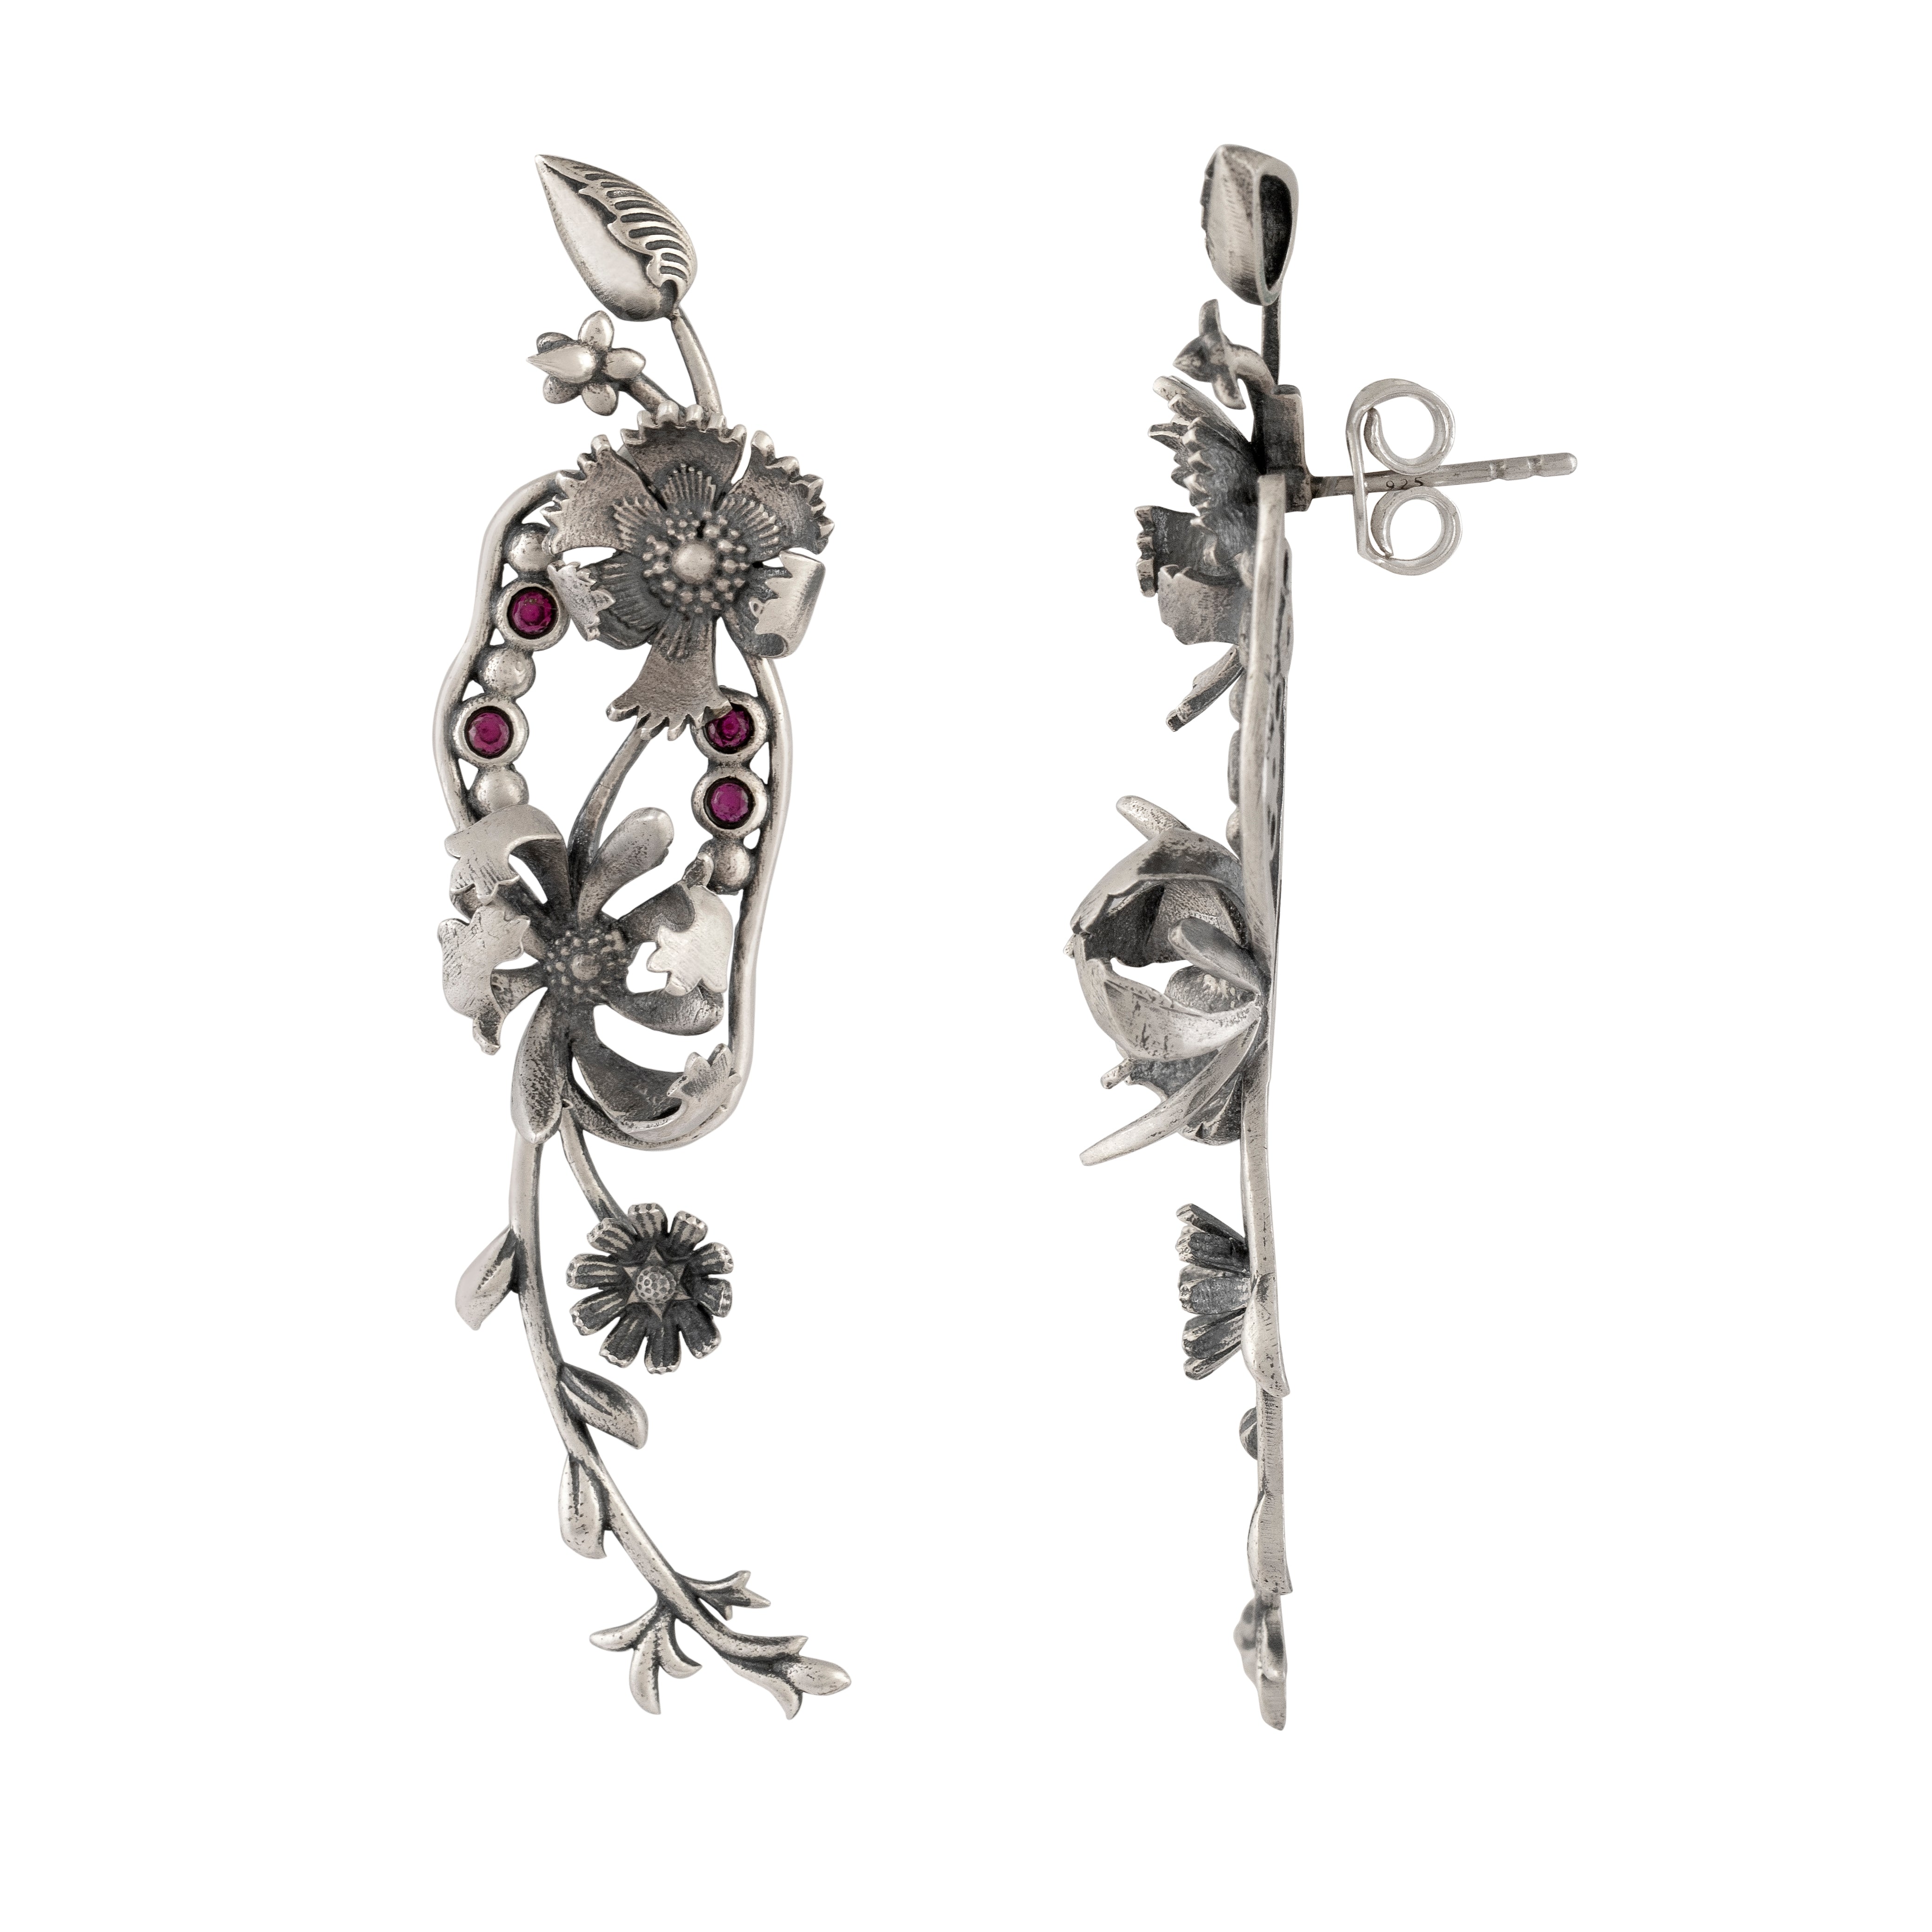 William Morris - Compton Silver Dangling Earrings by Moha